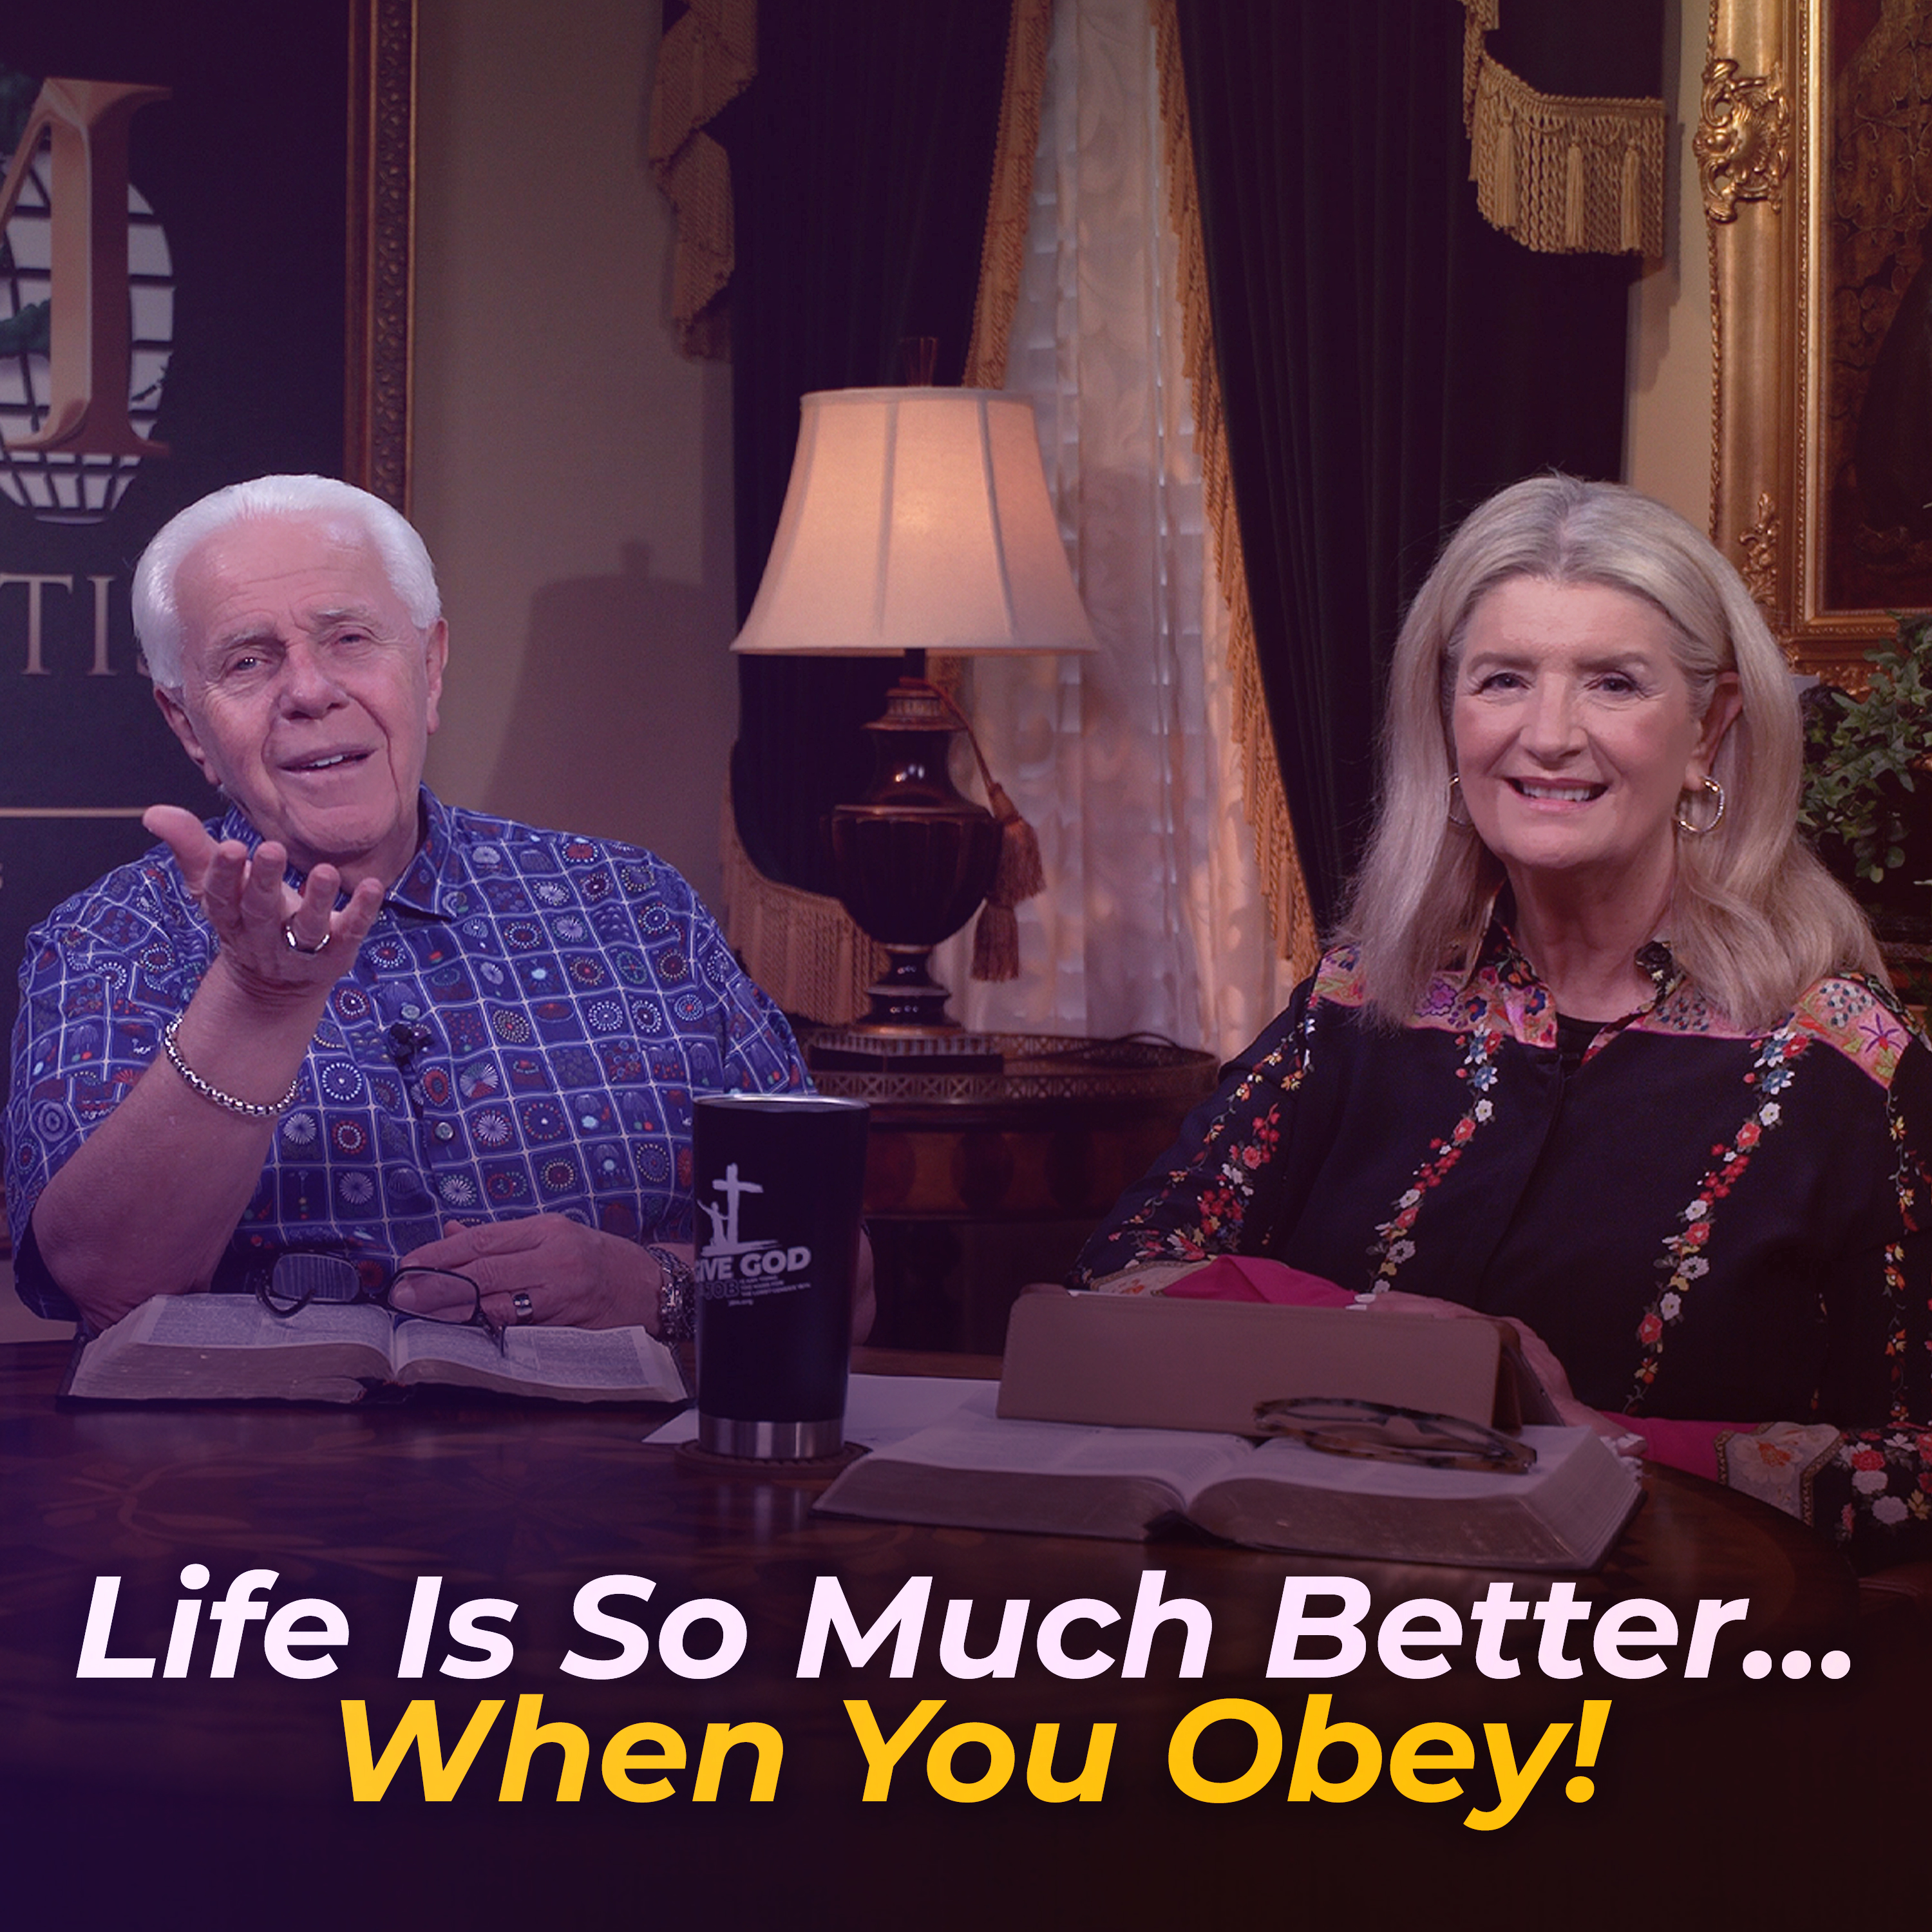 Life Is So Much Better…When You Obey!